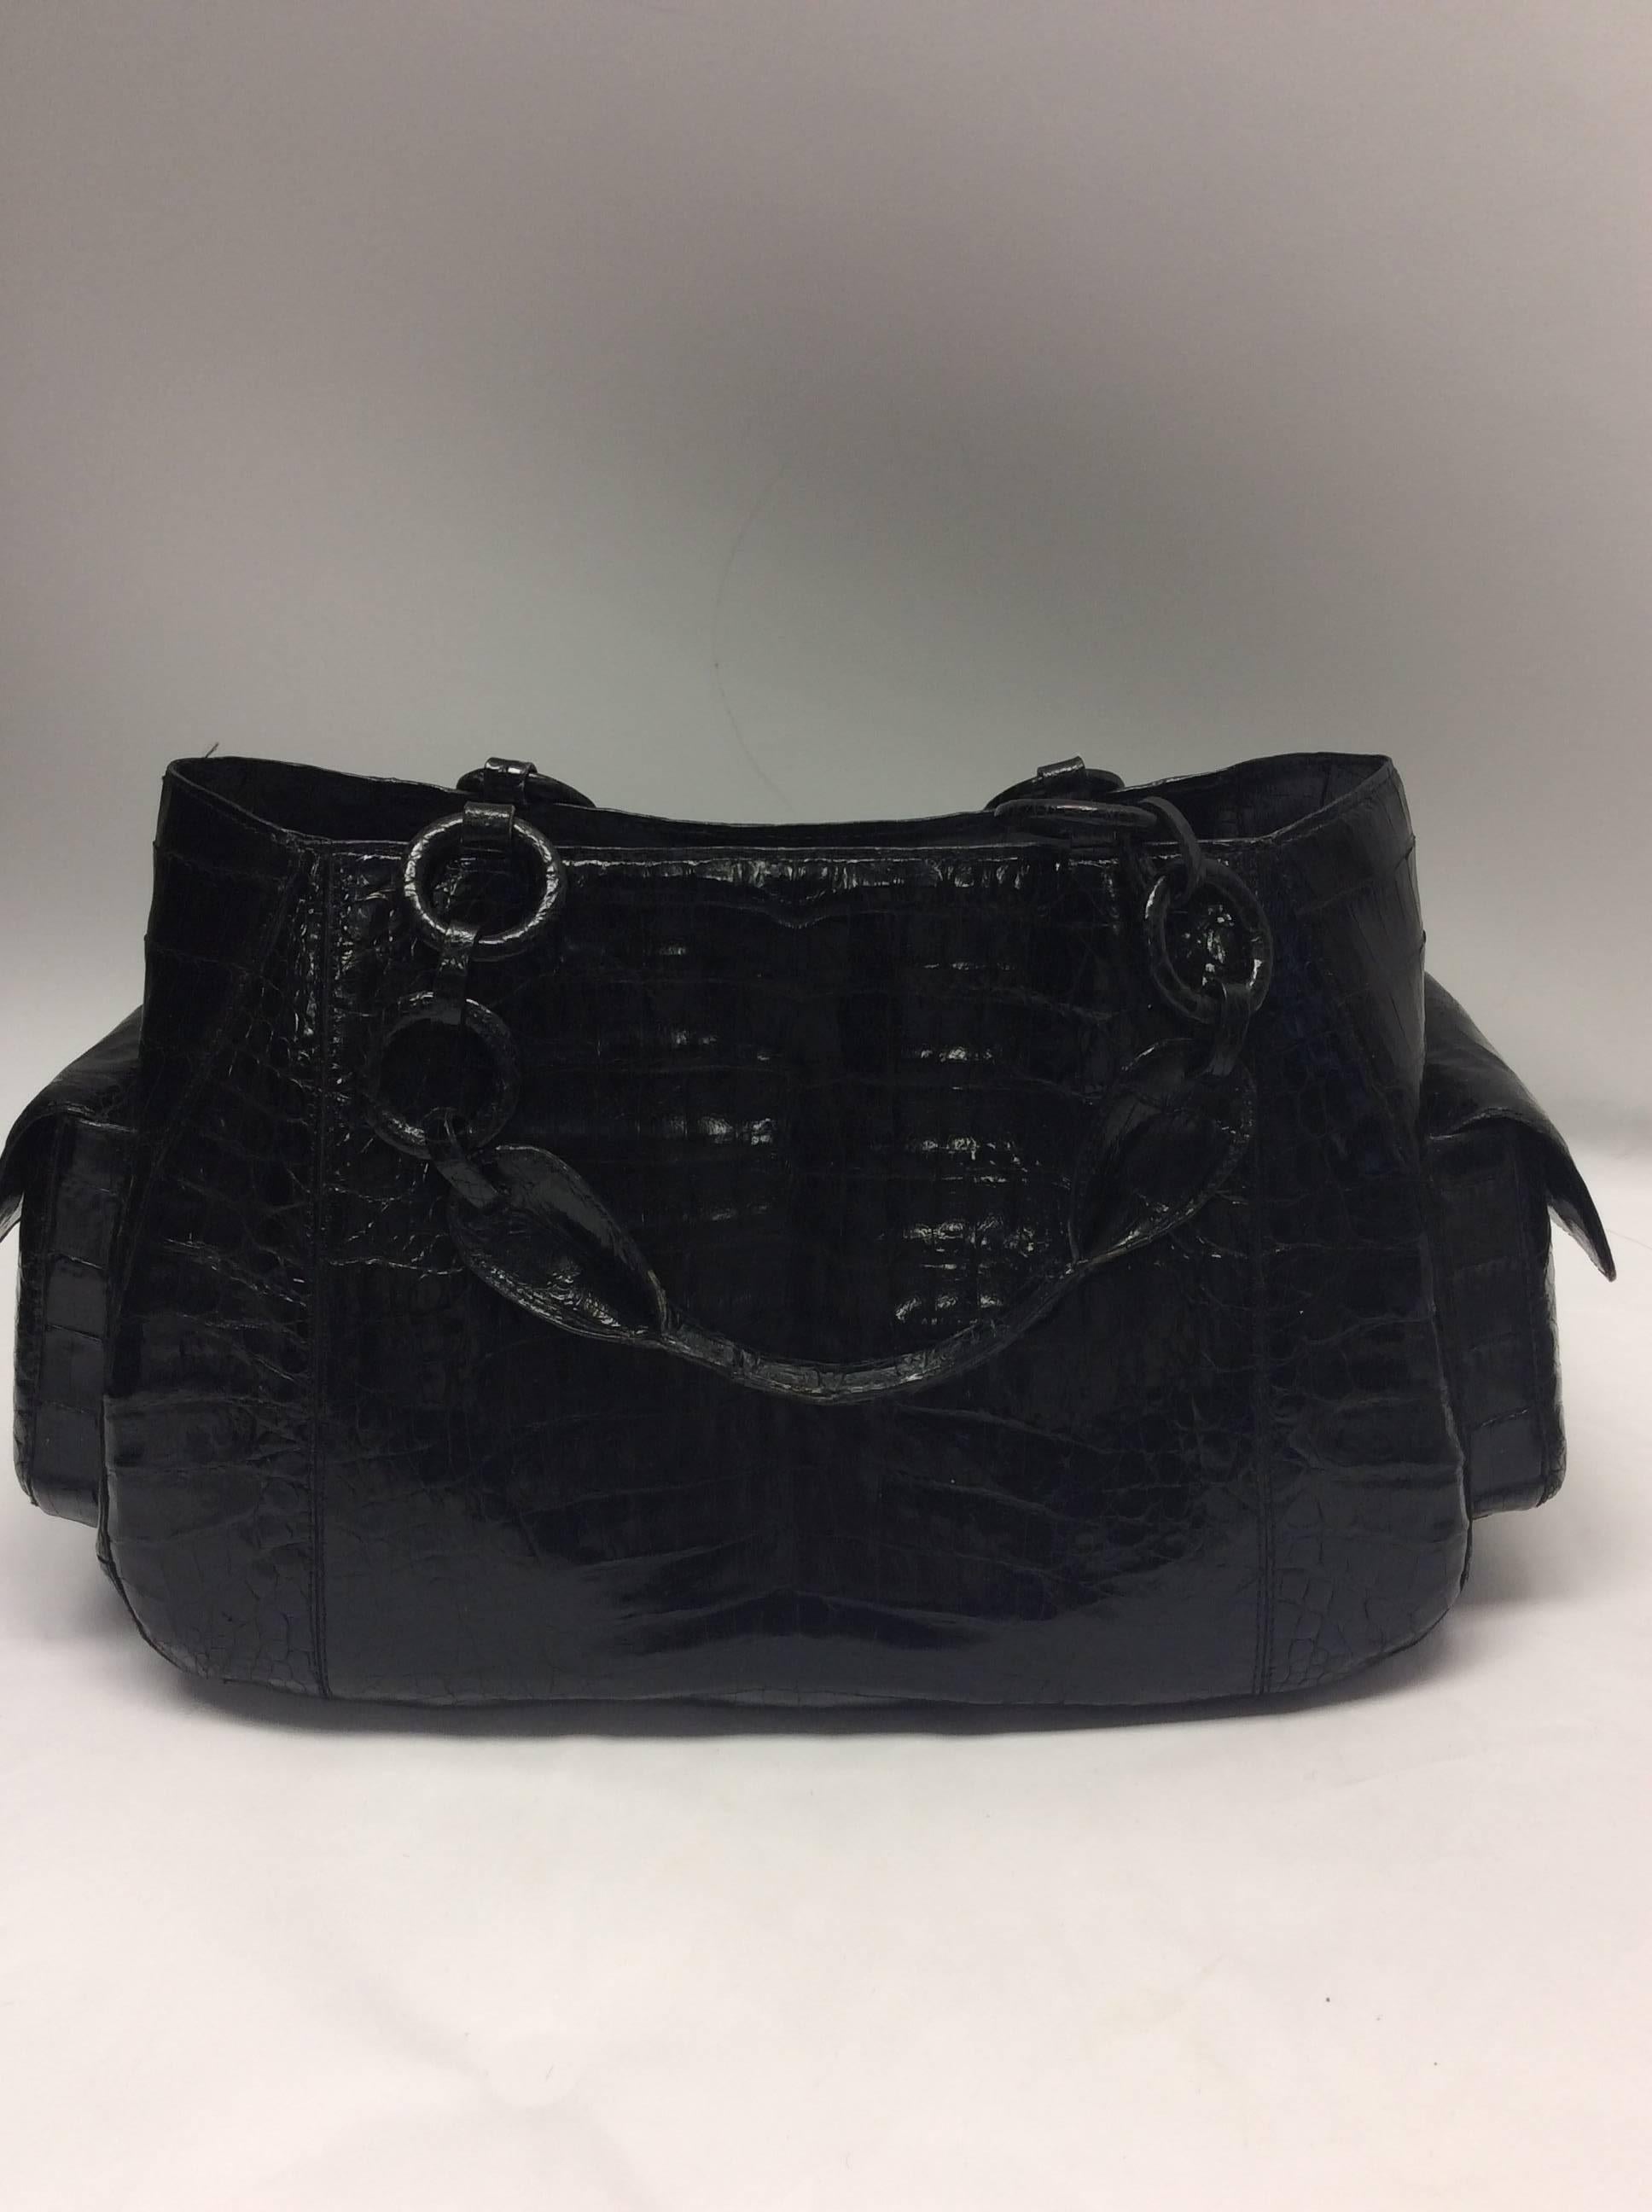 Nancy Gonzalez Black Crocodile Shoulder Bag In Excellent Condition For Sale In Narberth, PA